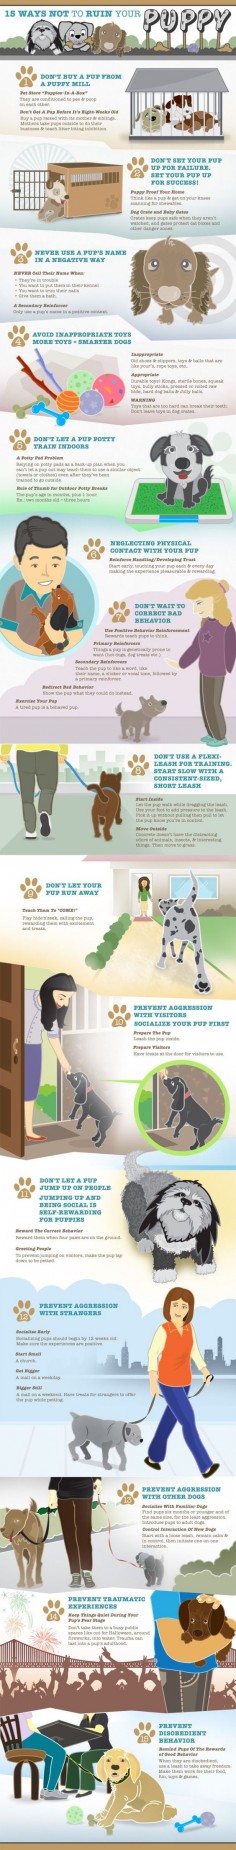 How to handle your puppy. #dogs #pets #puppy